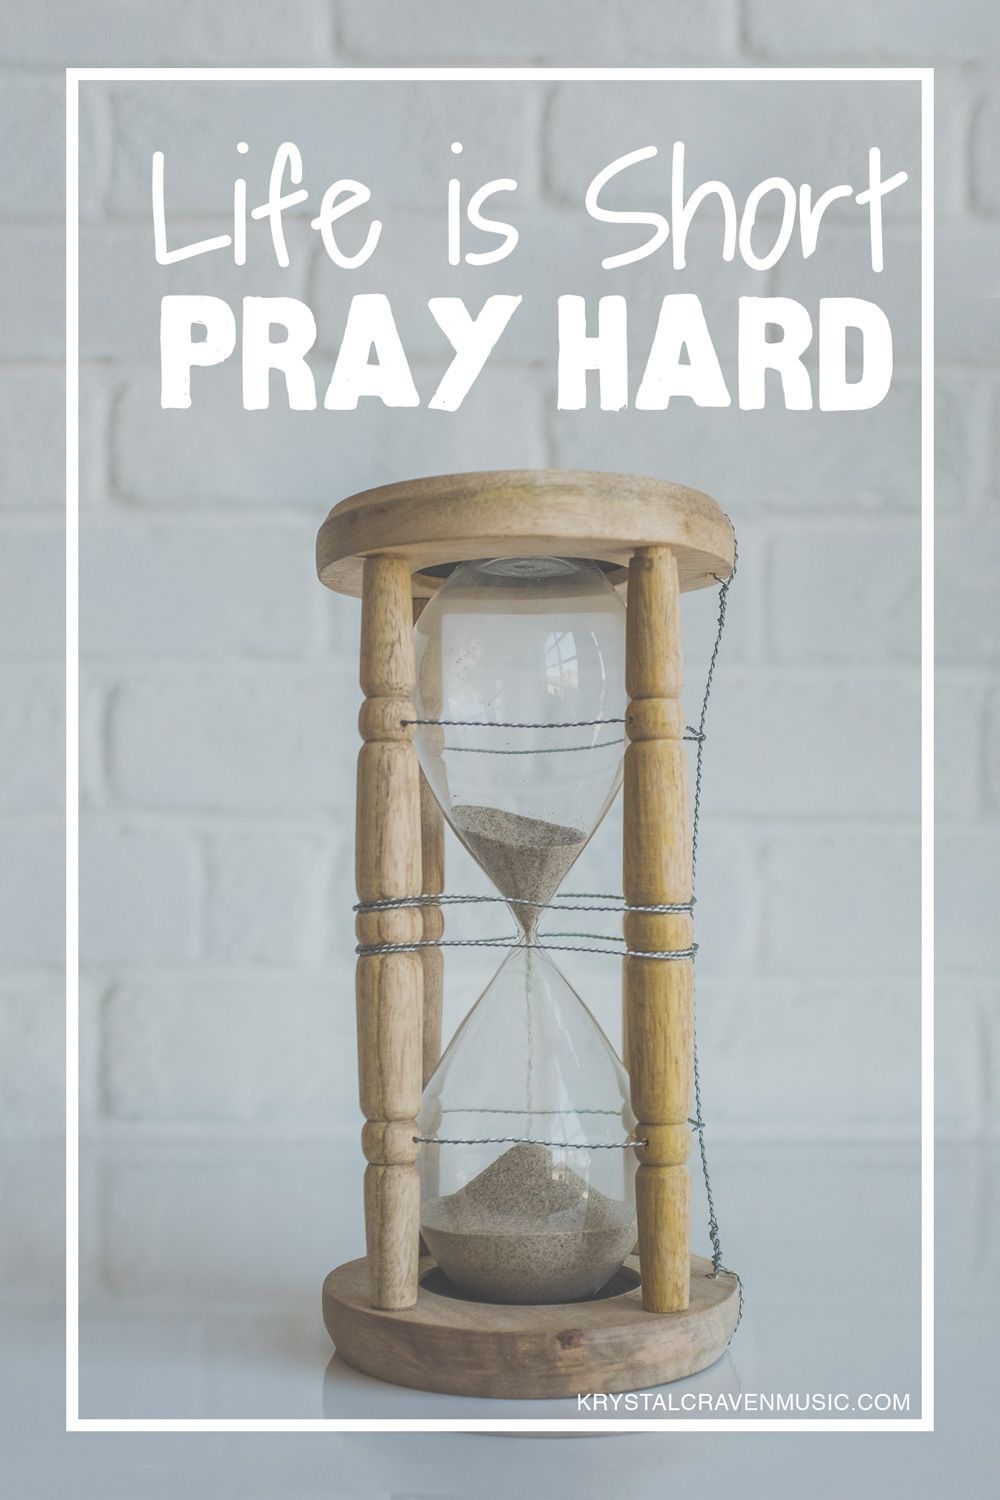 The words, "Life is short, pray hard" above an hourglass with a wooden frame on a white counter with a white brick backsplash.